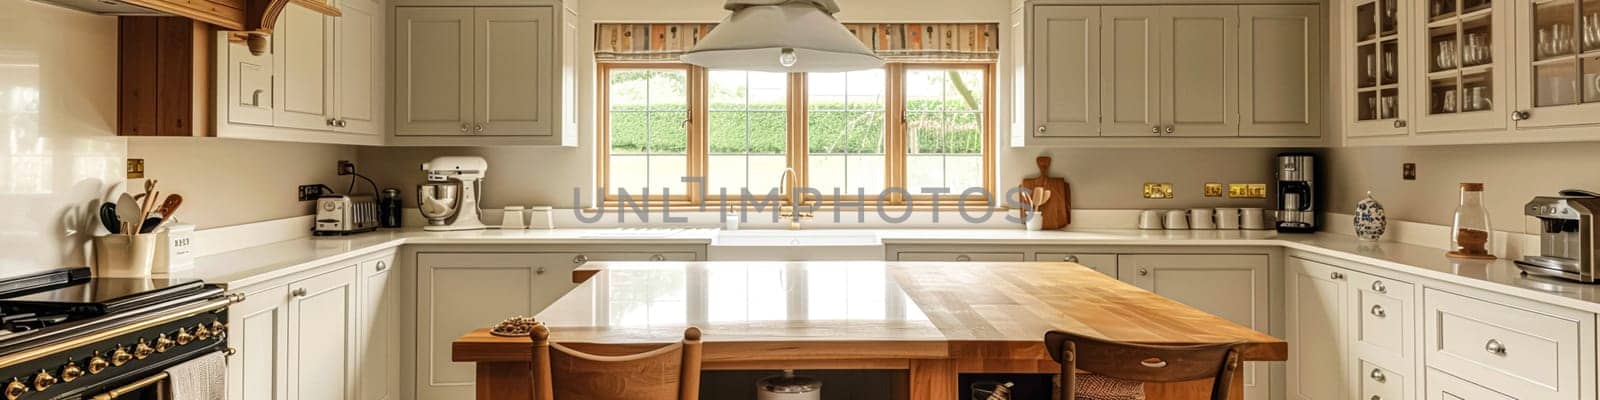 Bespoke kitchen design, country house and cottage interior design, English countryside style renovation and home decor idea by Anneleven